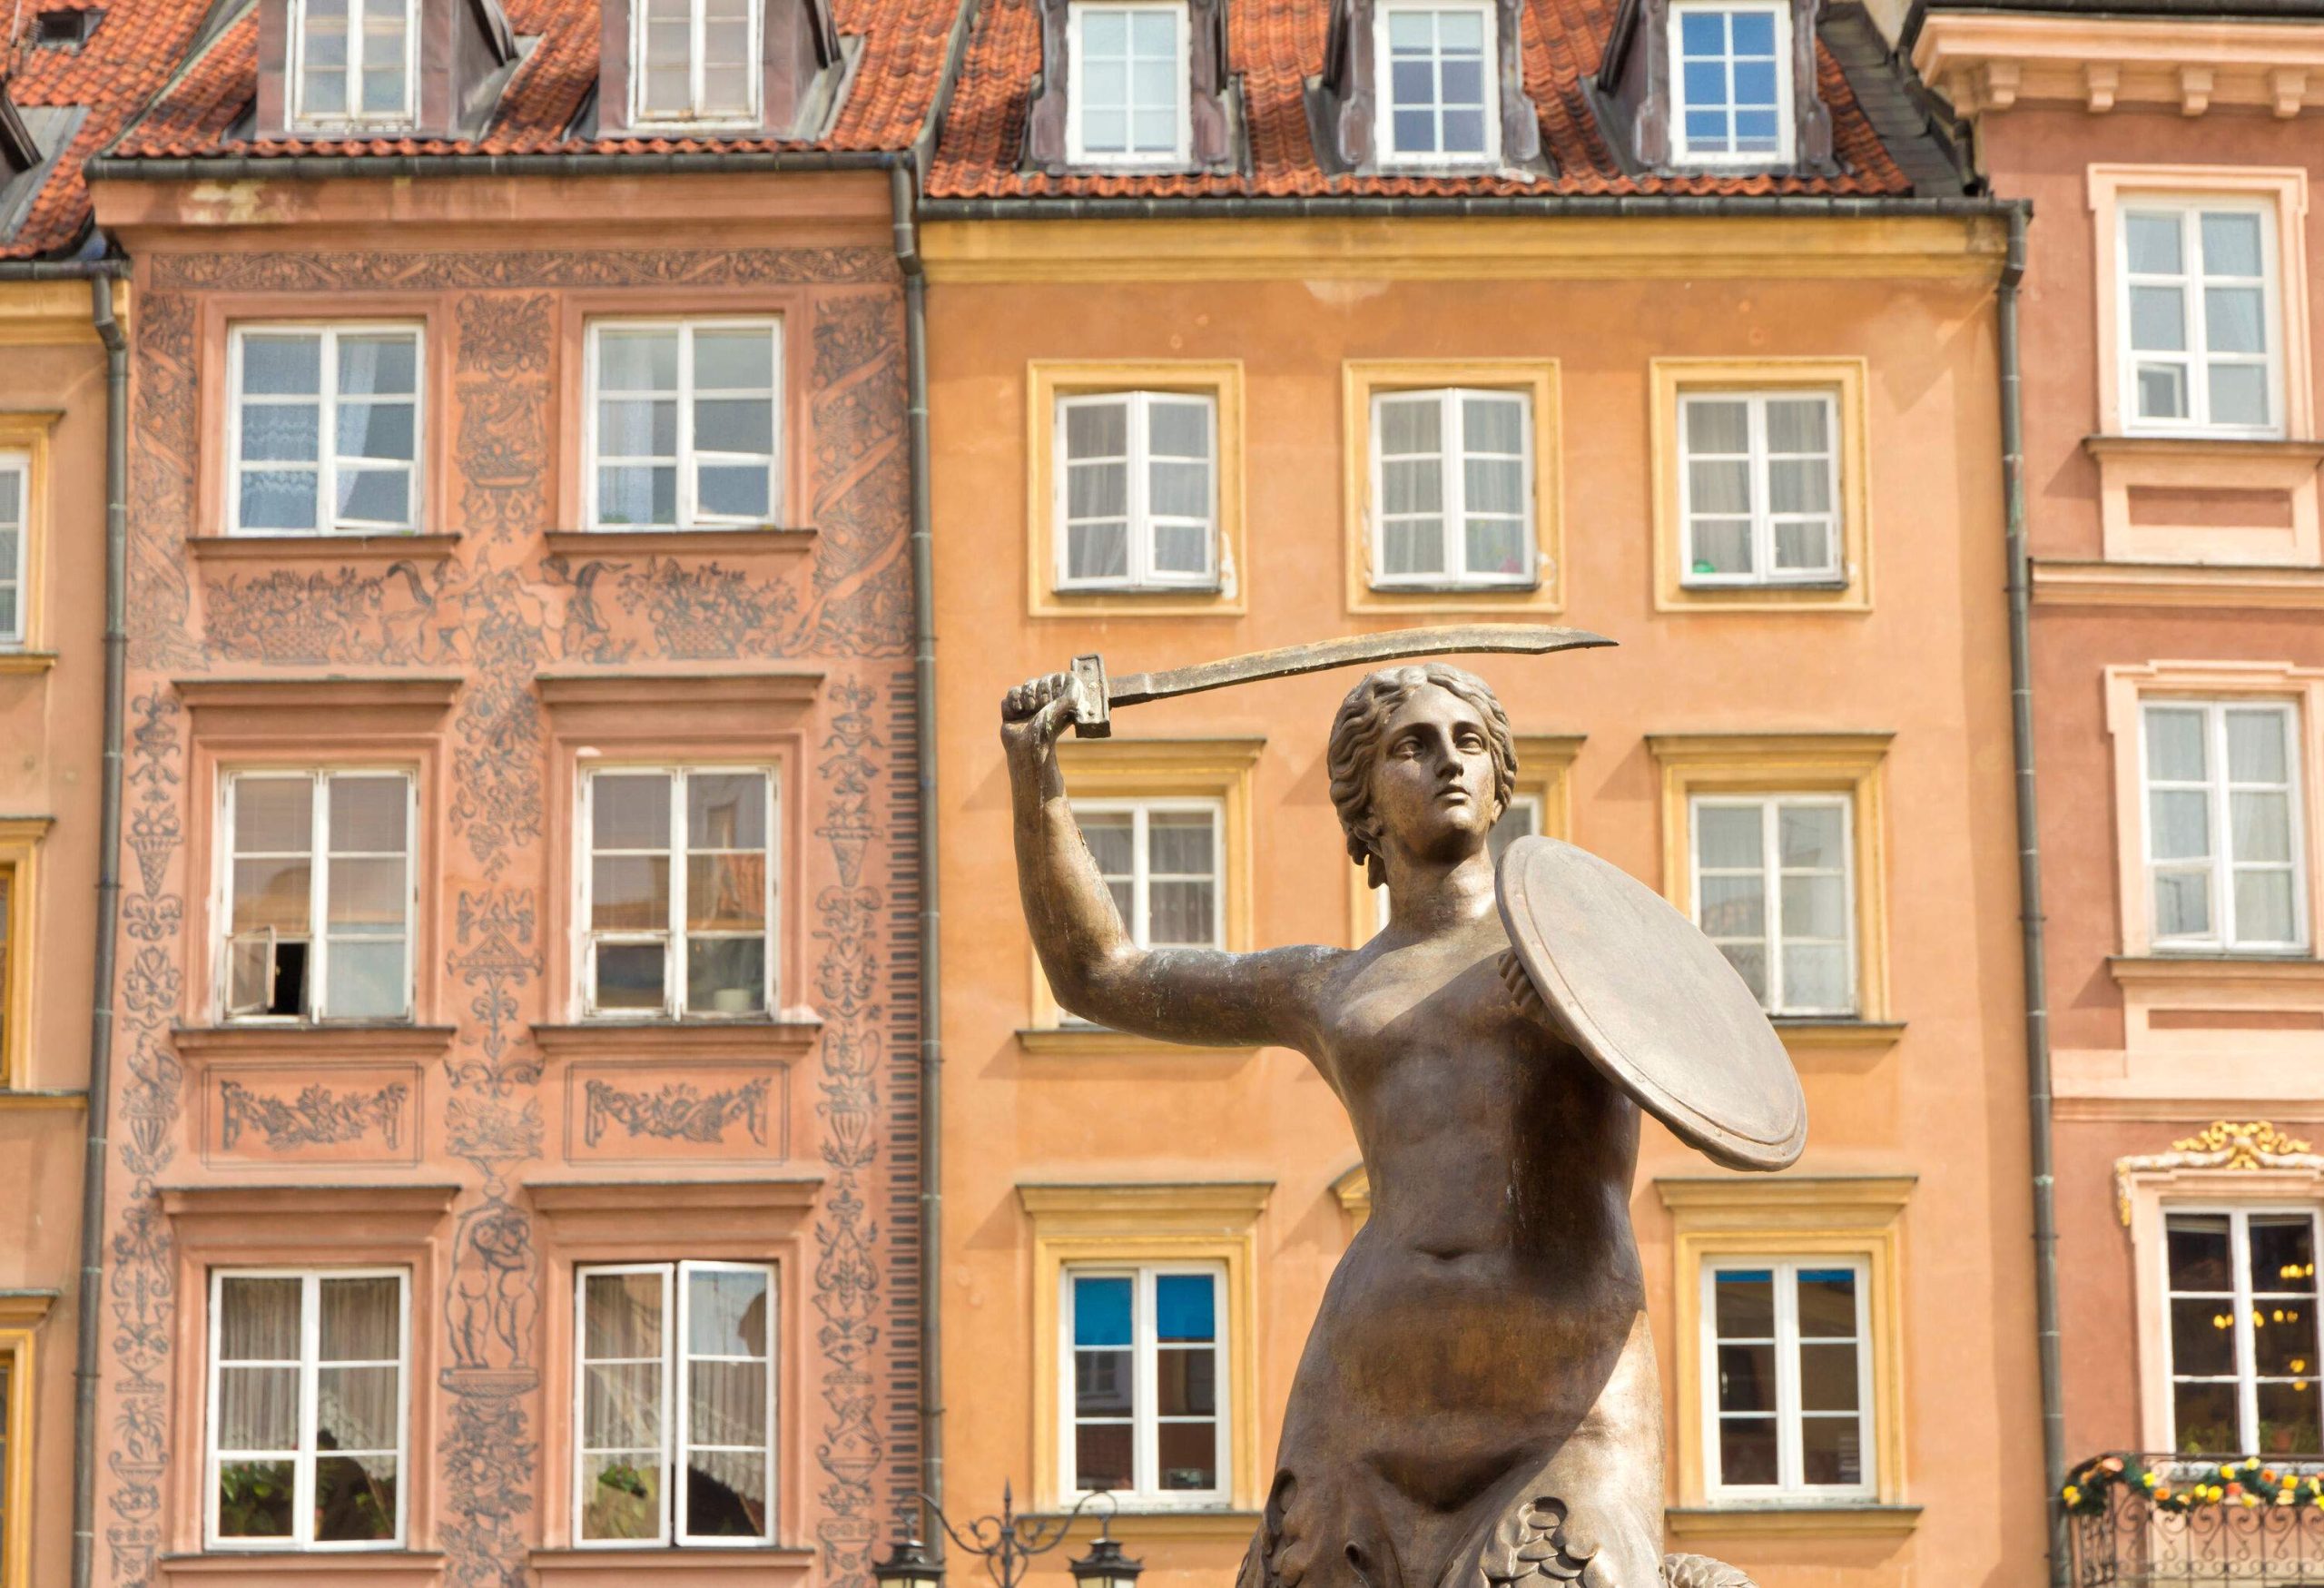 A statue of a mermaid holding a sword and a shield with colourful buildings in the background.